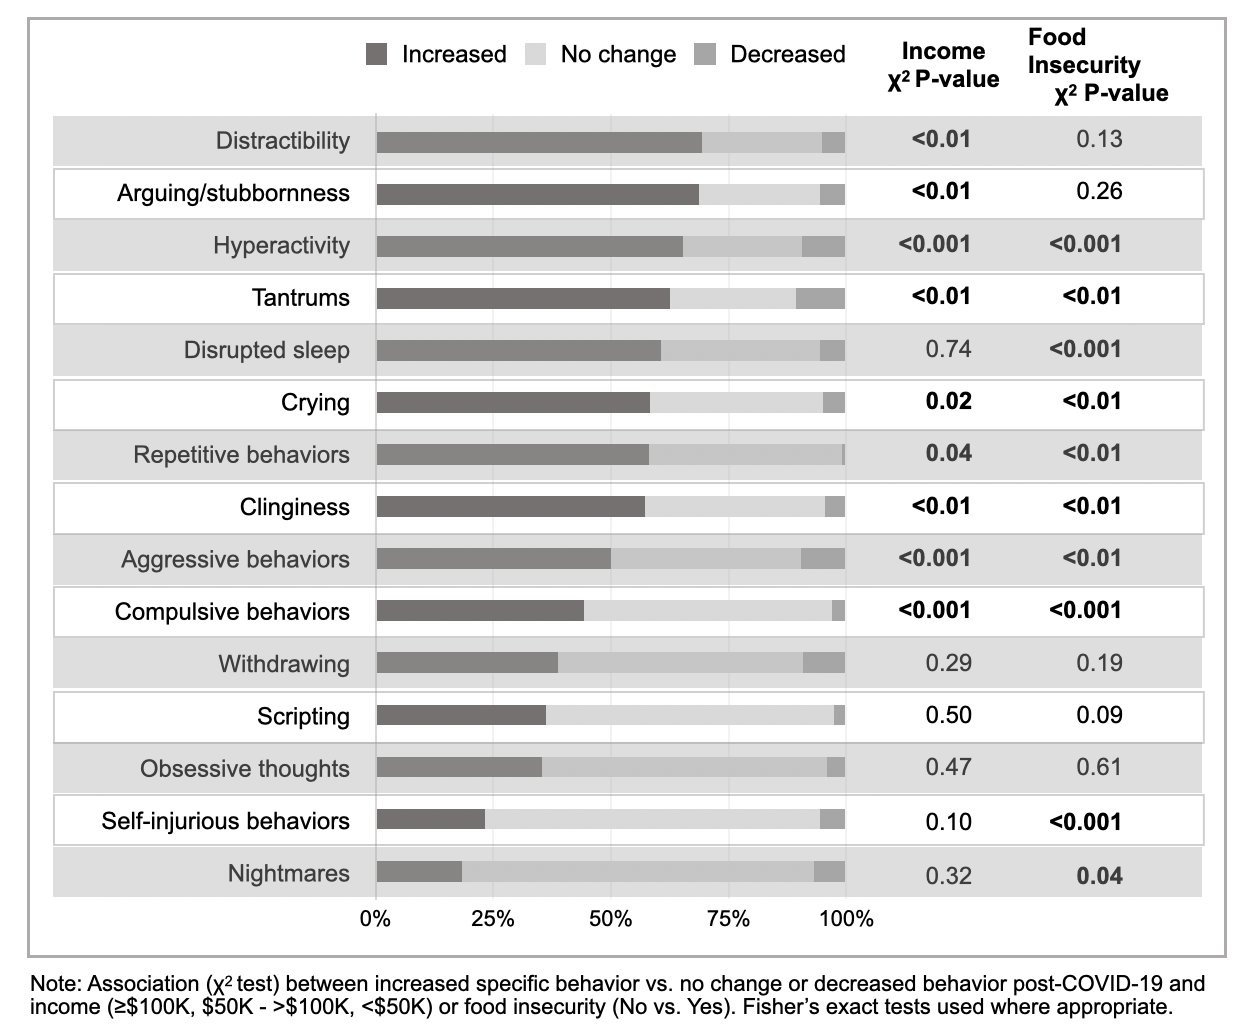 This table developed by post-doctoral fellow Anita Panjwani shows the increase levels of 15 behaviors associated with autism spectrum disorder found in 200 U.S. children in 2020 during the COVID-19 pandemic. The right columns separate low income and food insecure families. The bolded numbers represent behaviors that saw significant increase a year ago.